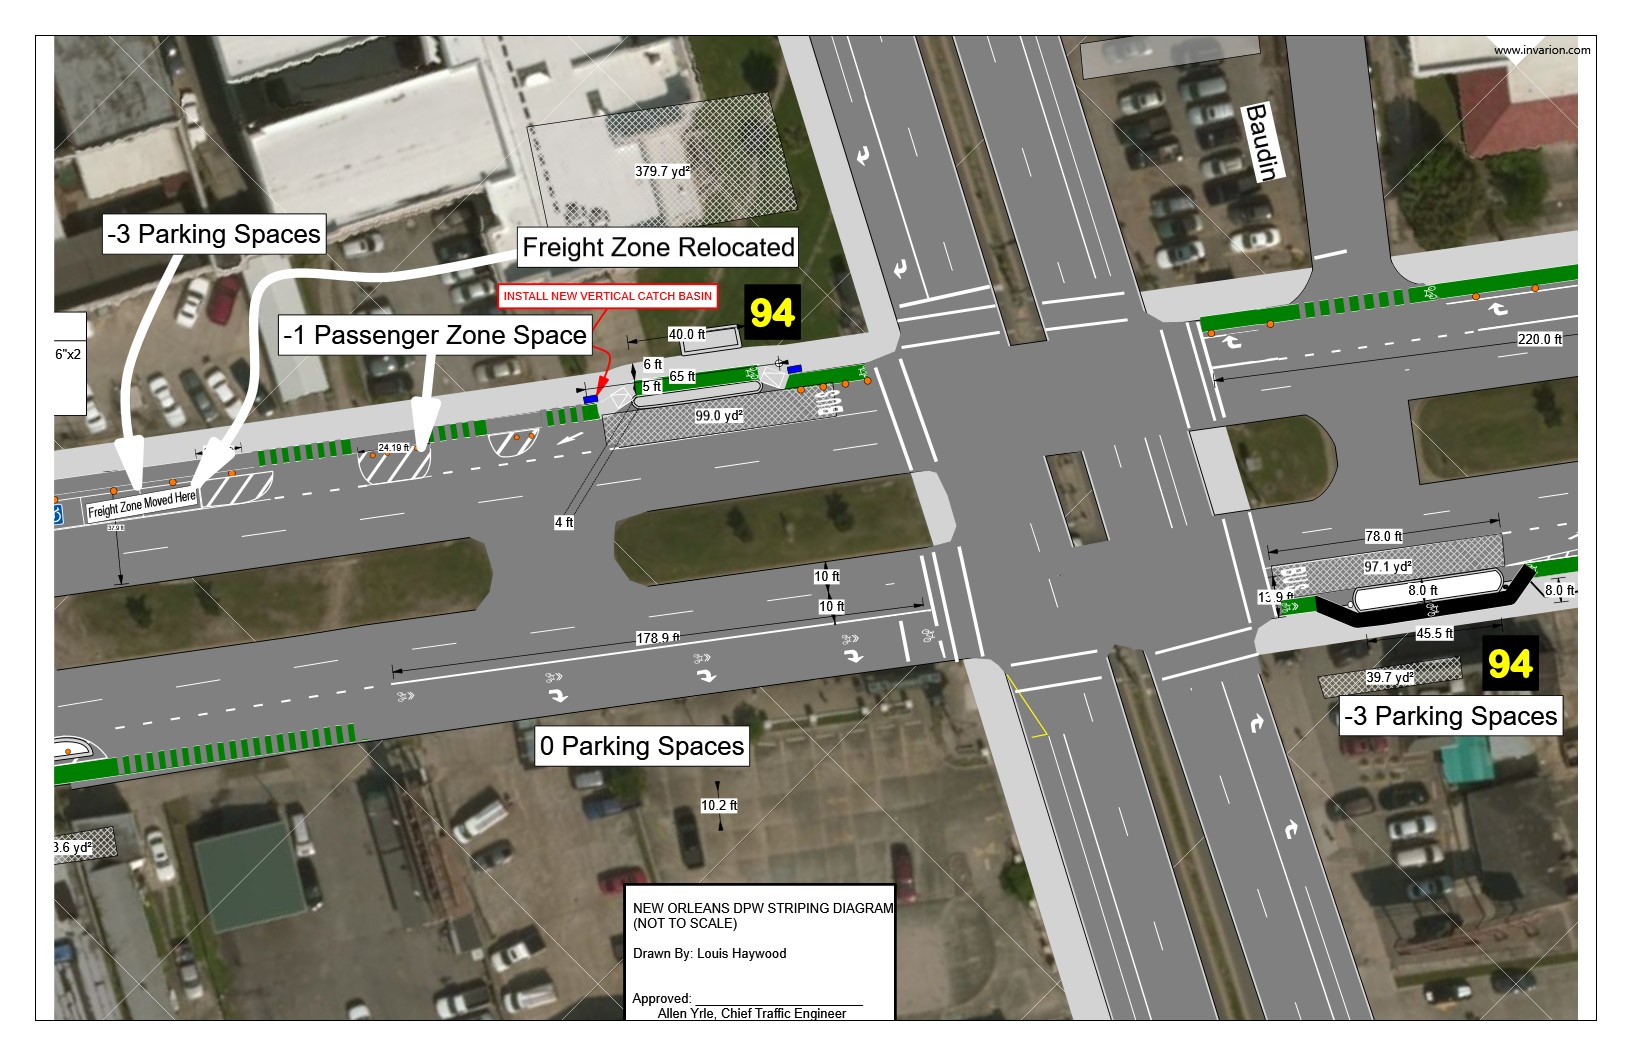 S. BROAD STREET IMPROVEMENTS BEGINNING THIS MONTH